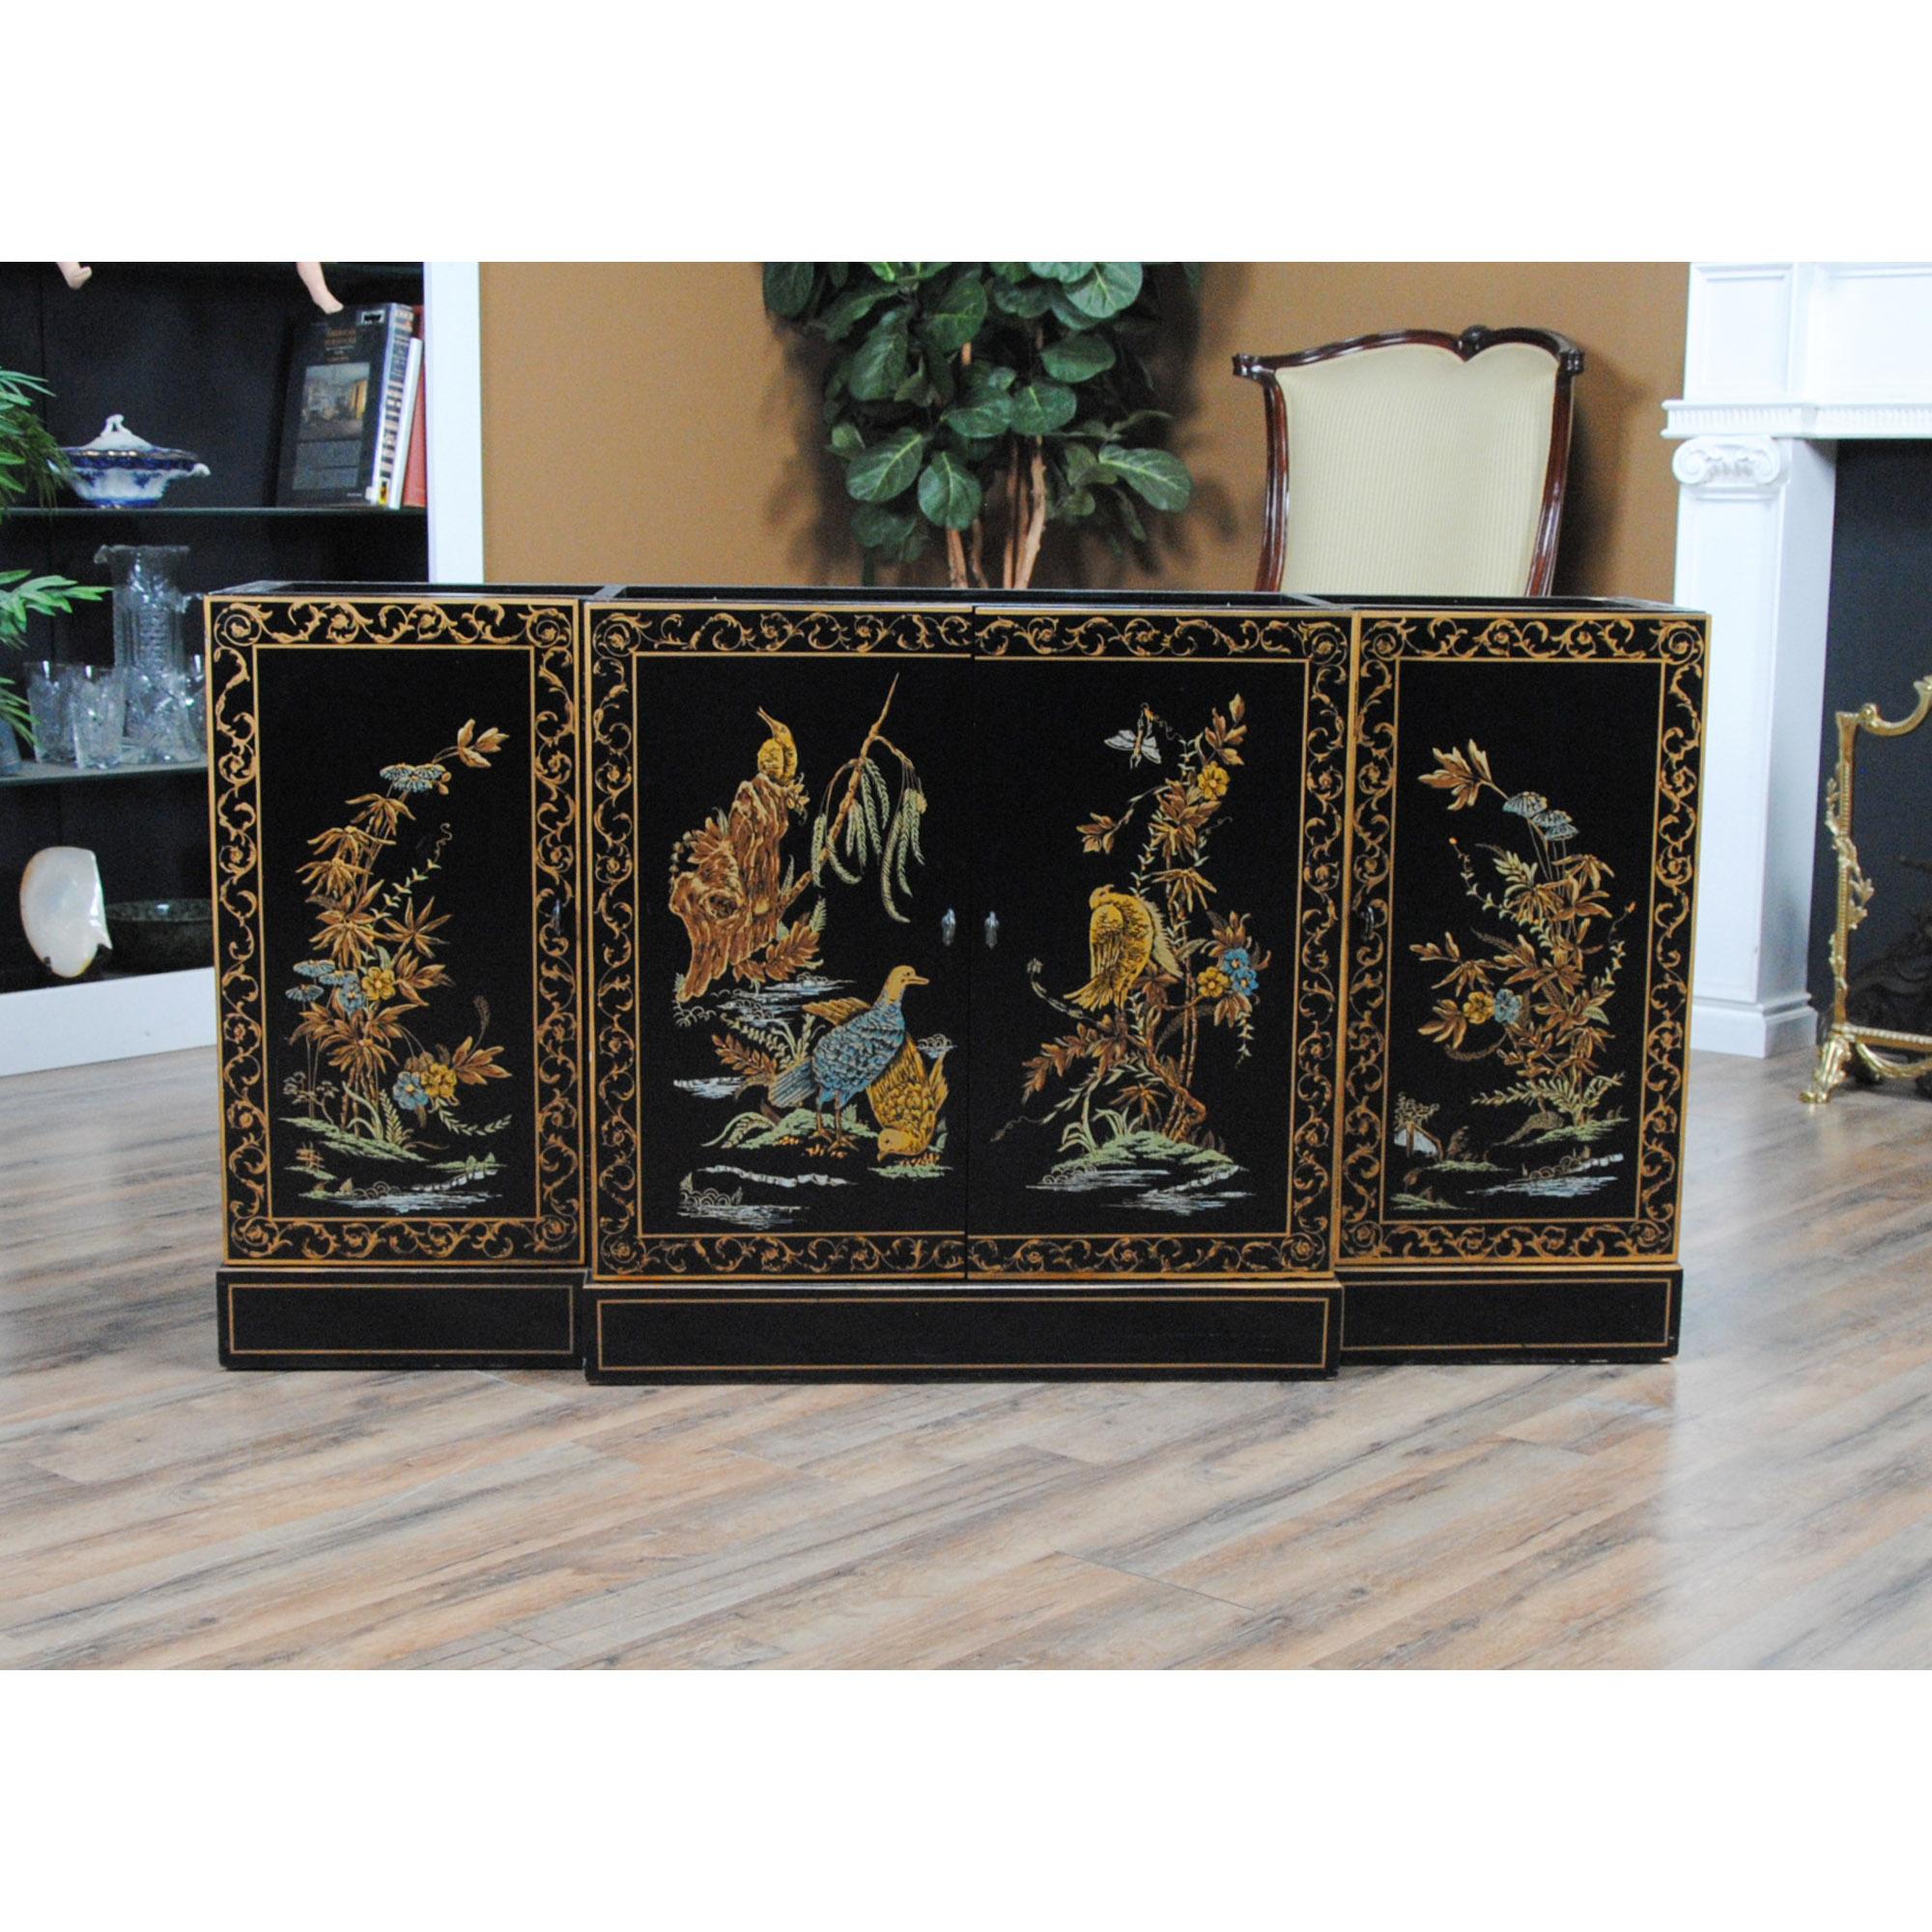 The Vintage Drexel Black Lacquered Breakfront is as elegant as China cabinets come. This breakfront accentuates and compliments any setting. Built in two parts, the Vintage Drexel Black Lacquered Breakfront top section features limited lattice work